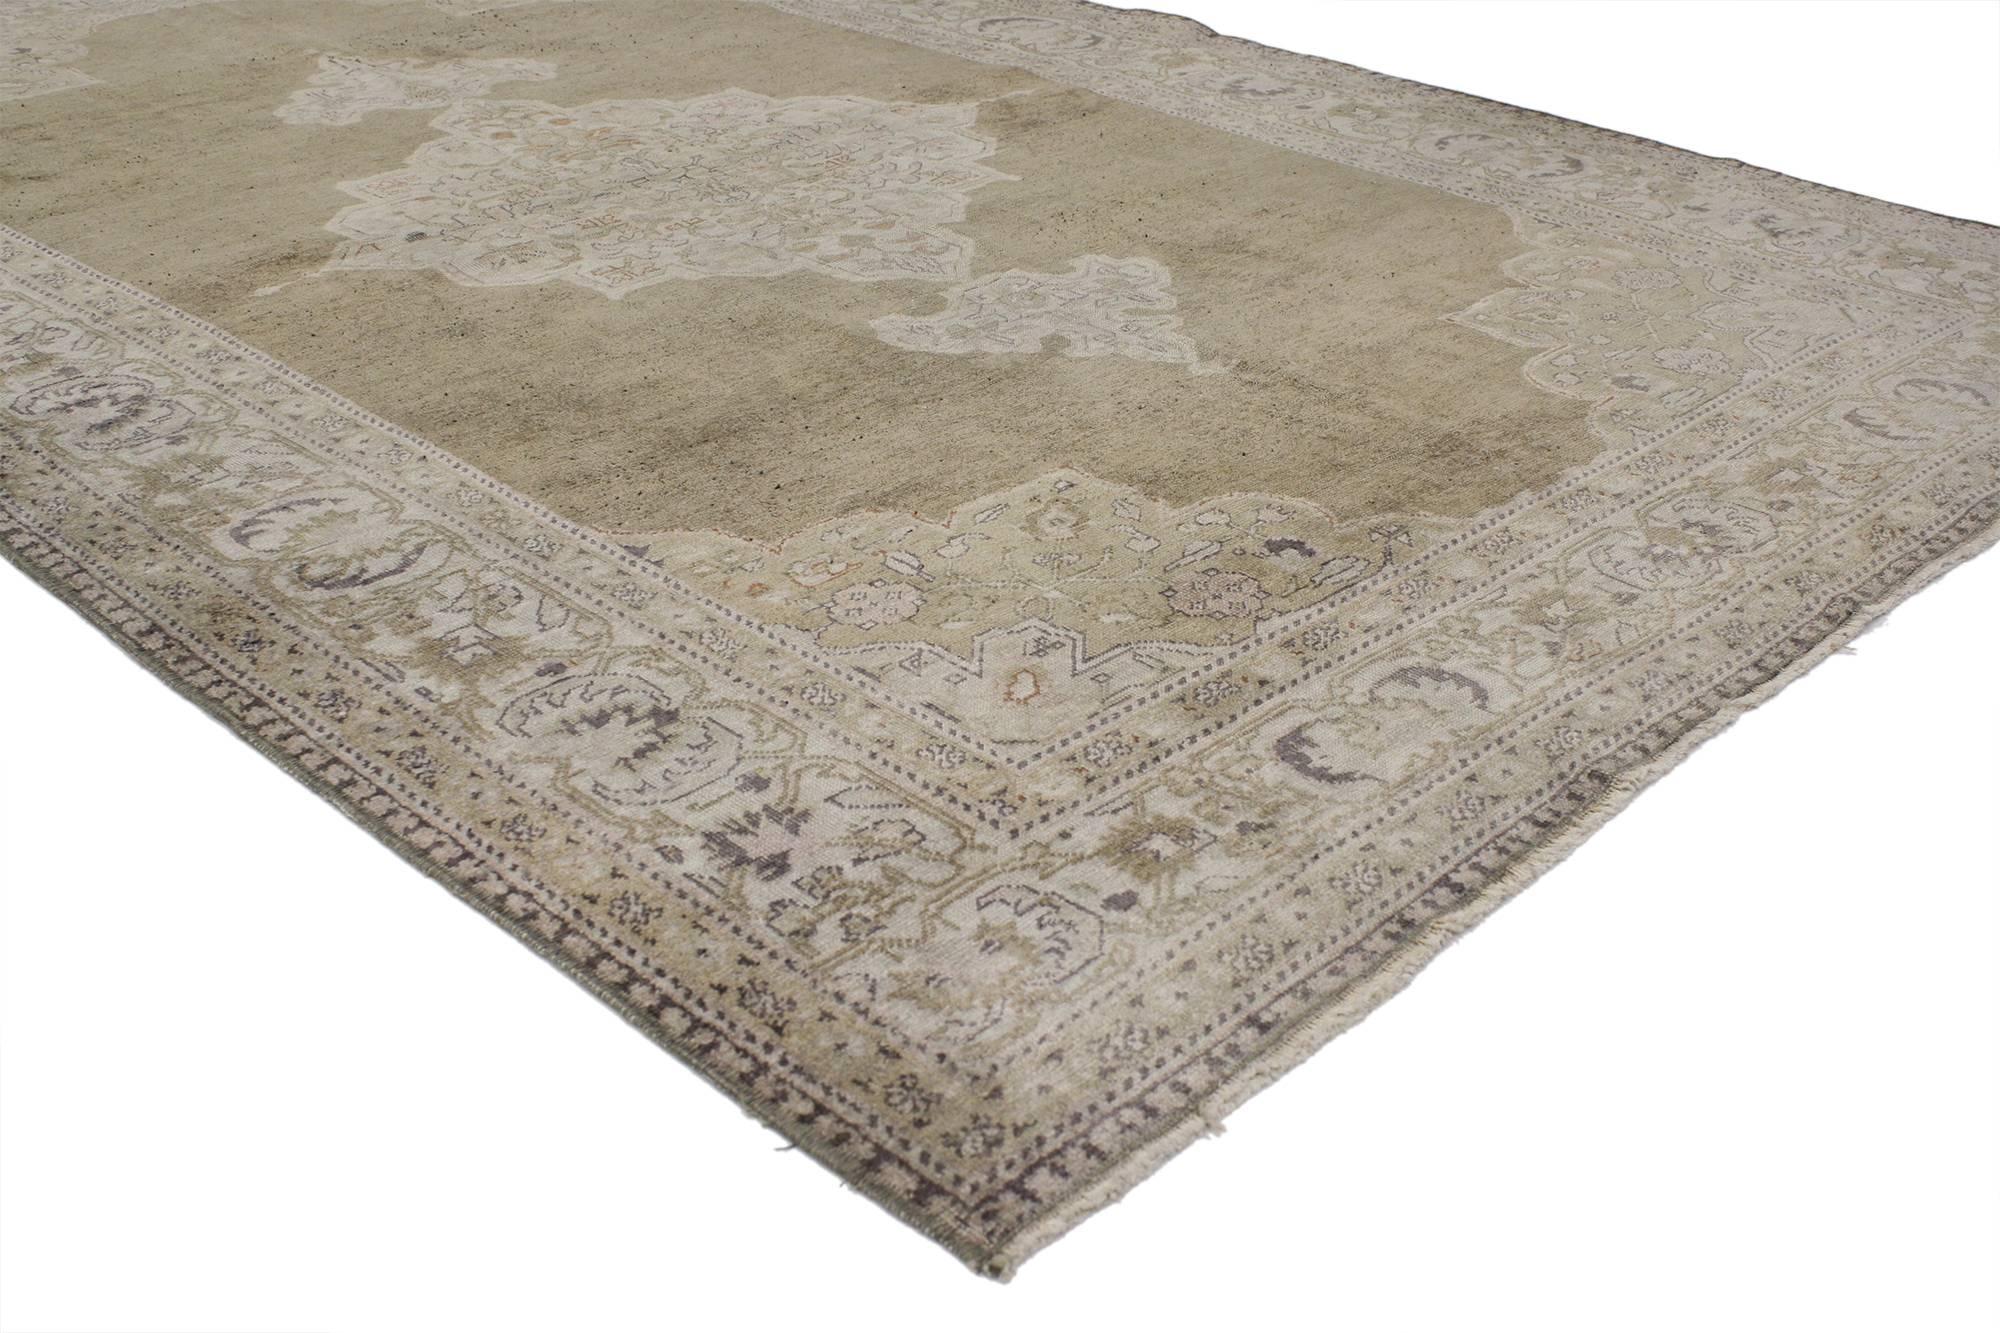 52071, vintage Turkish Oushak rug with traditional style, earth tone colors. This hand-knotted wool vintage Turkish Oushak rug features an elaborate grand center medallion with adjoining palmettes in an open abrashed field. A deep, layered border